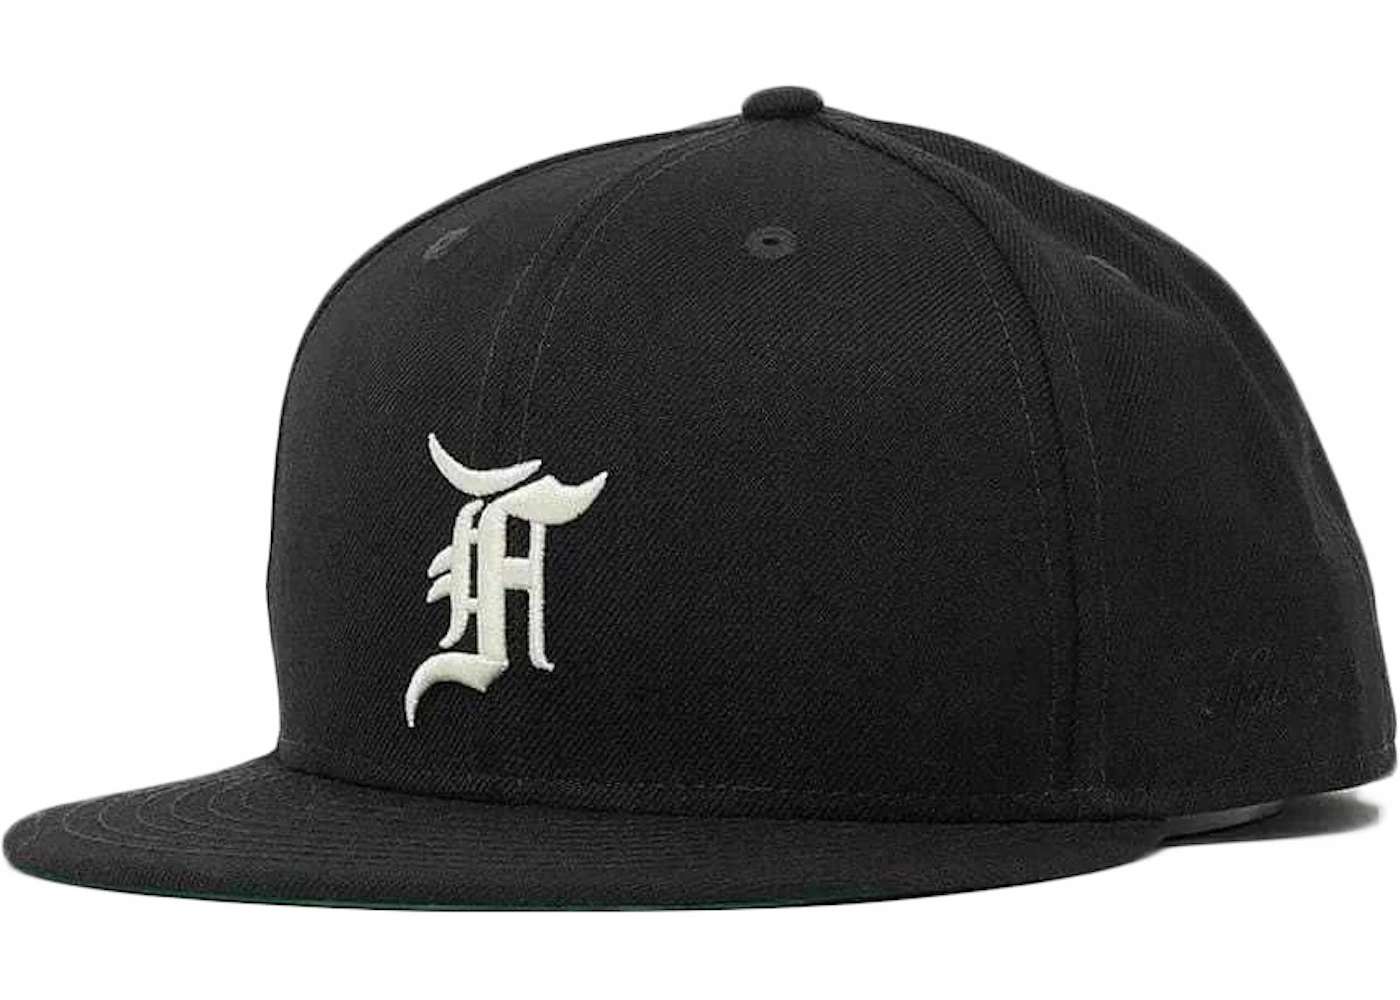 FEAR-OF-GOD-ESSENTIALS-New-Era-Fitted-Cap-FW20-Black-White.png